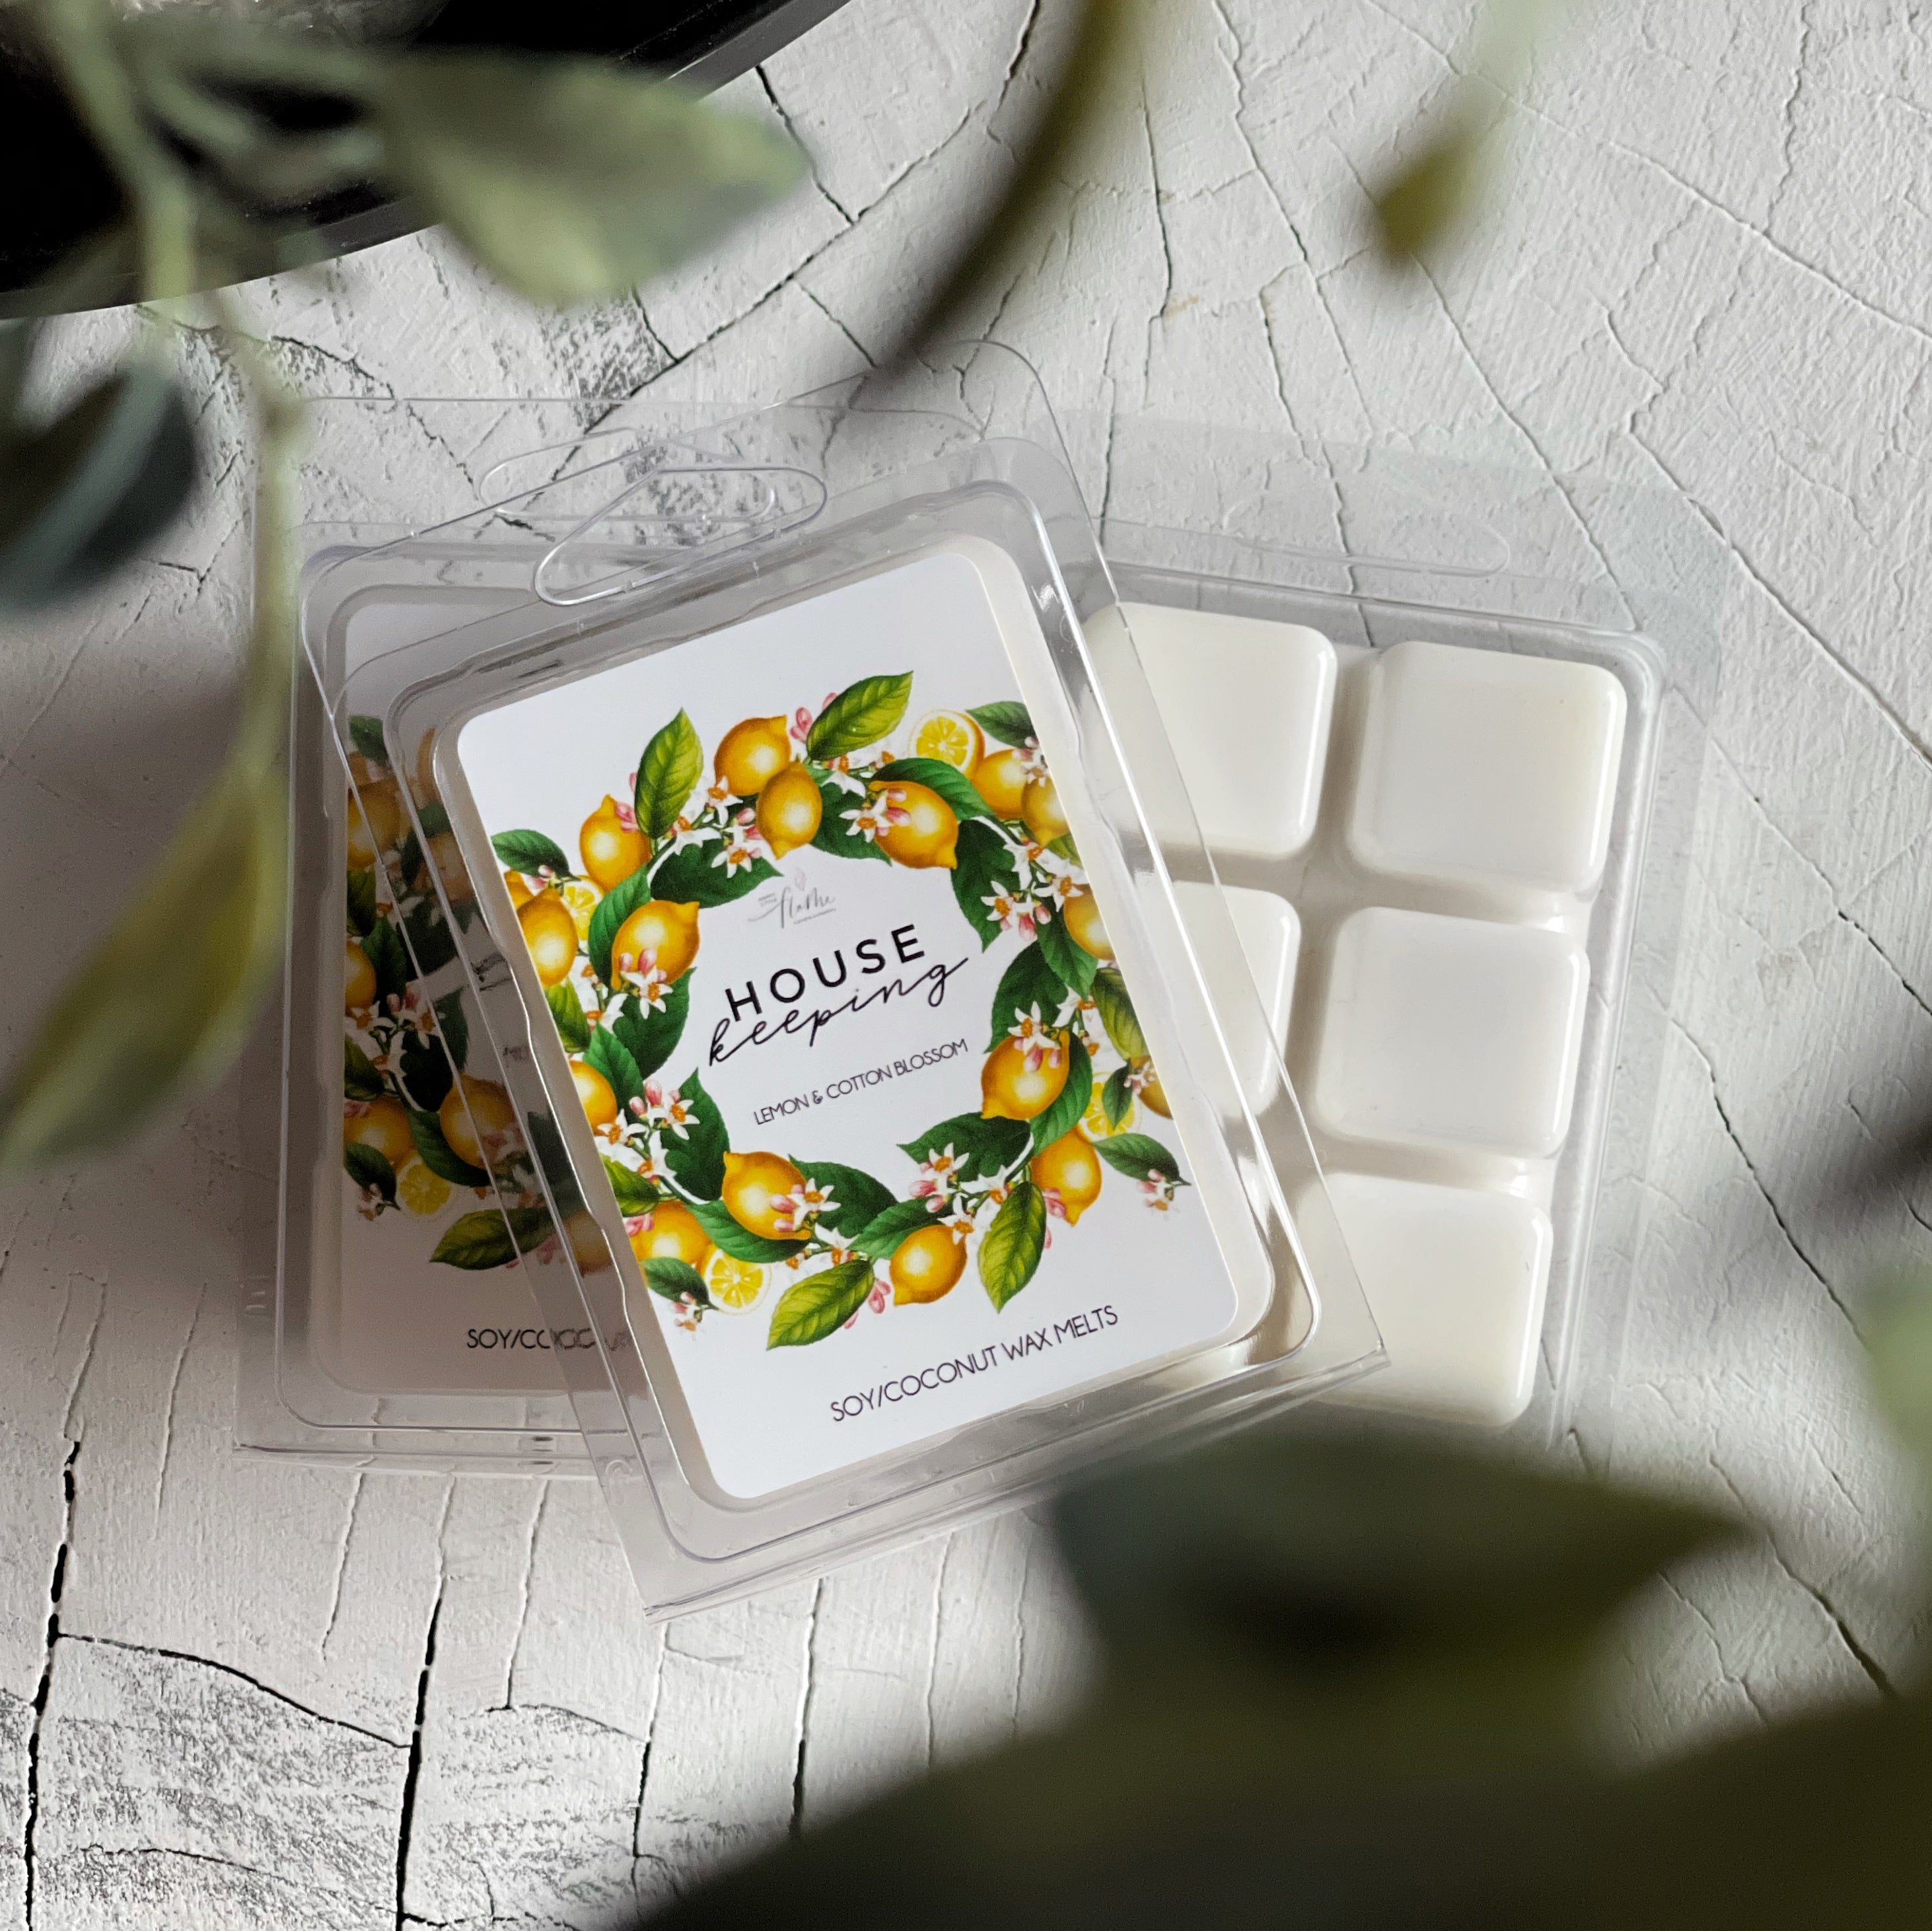 The Best Smelling Wax Melts To Make Your Home Smell Cozy